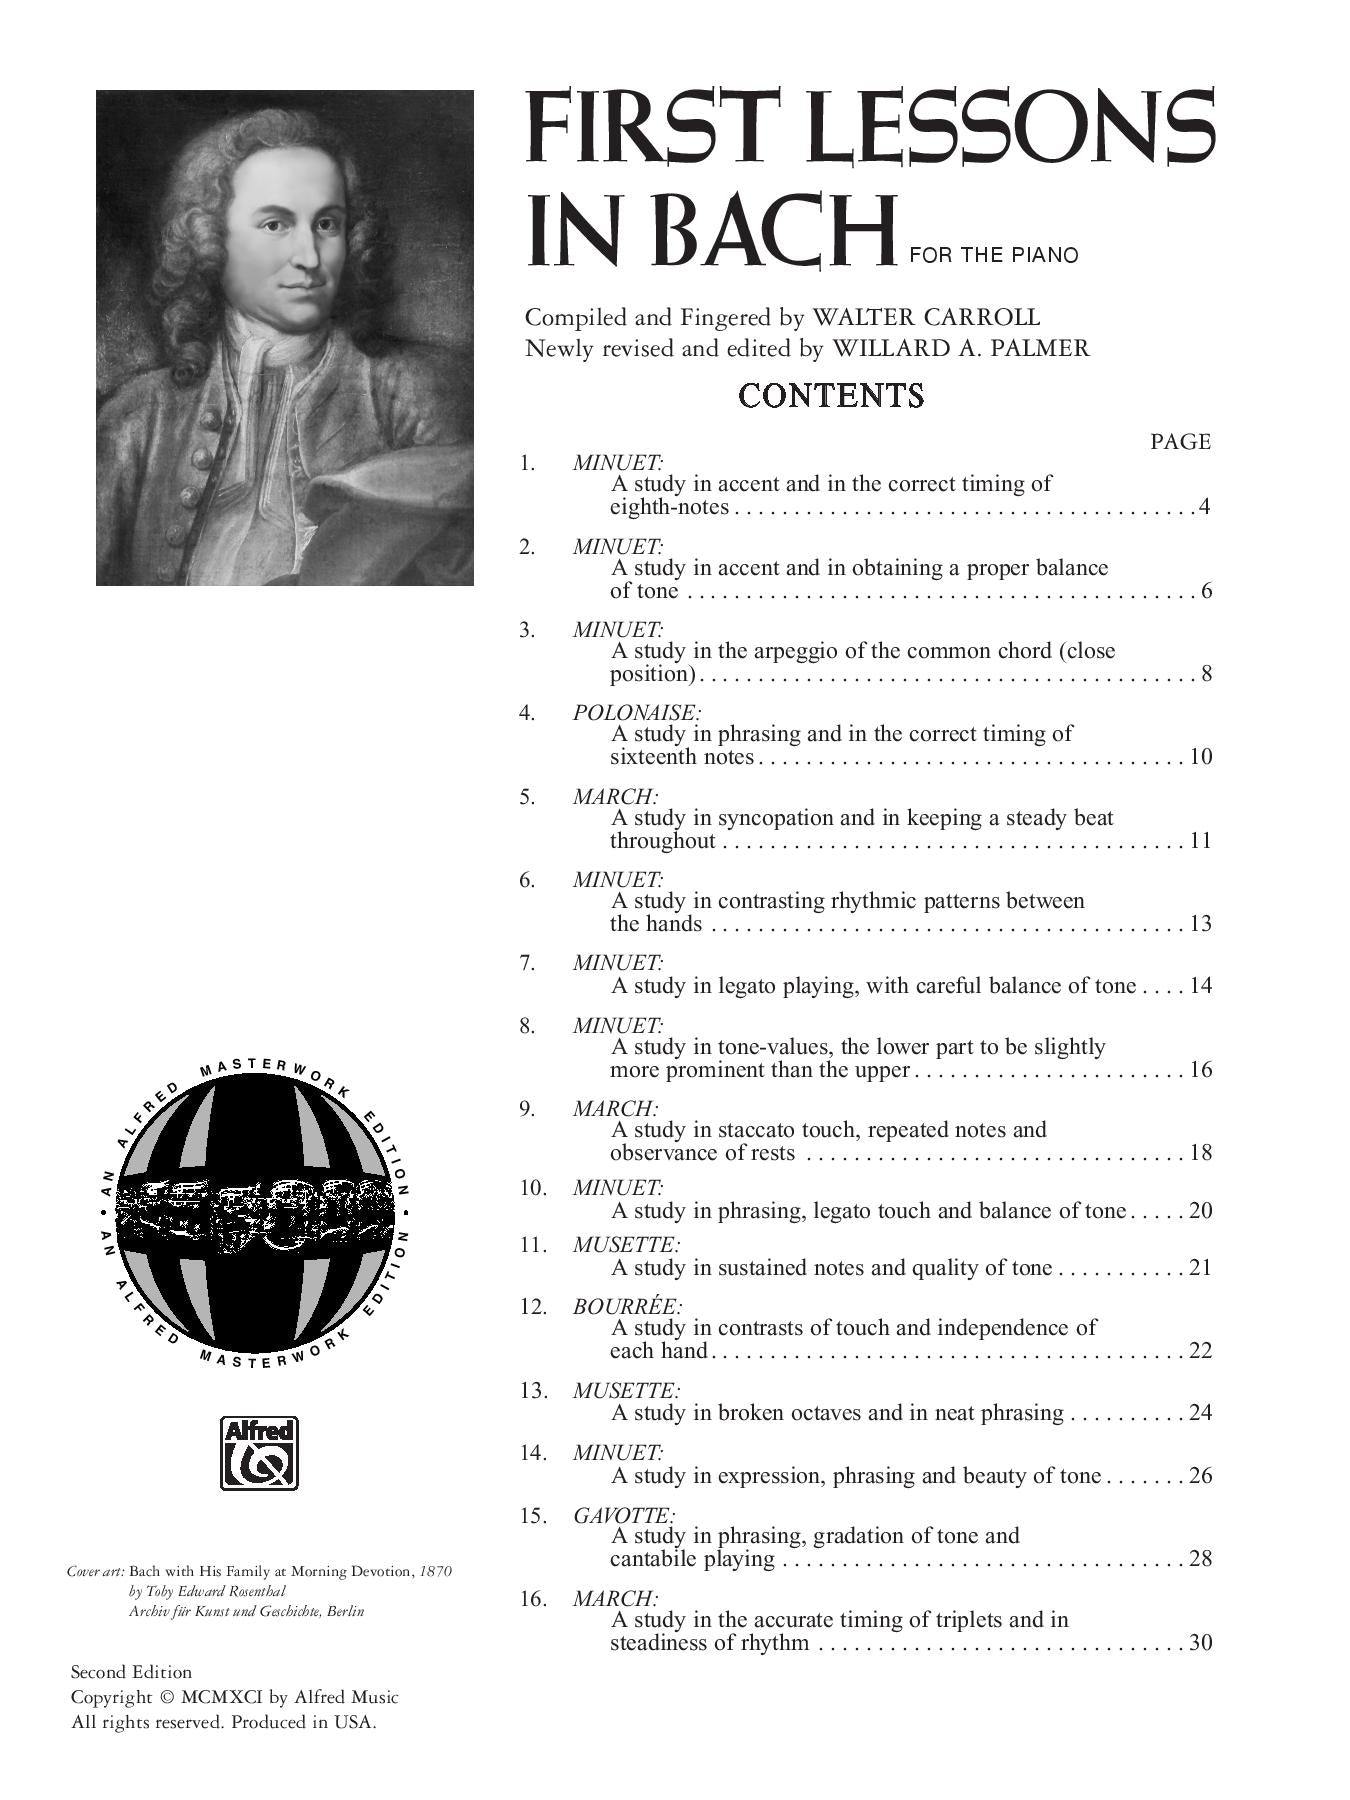 First Lessons in Bach for the Piano